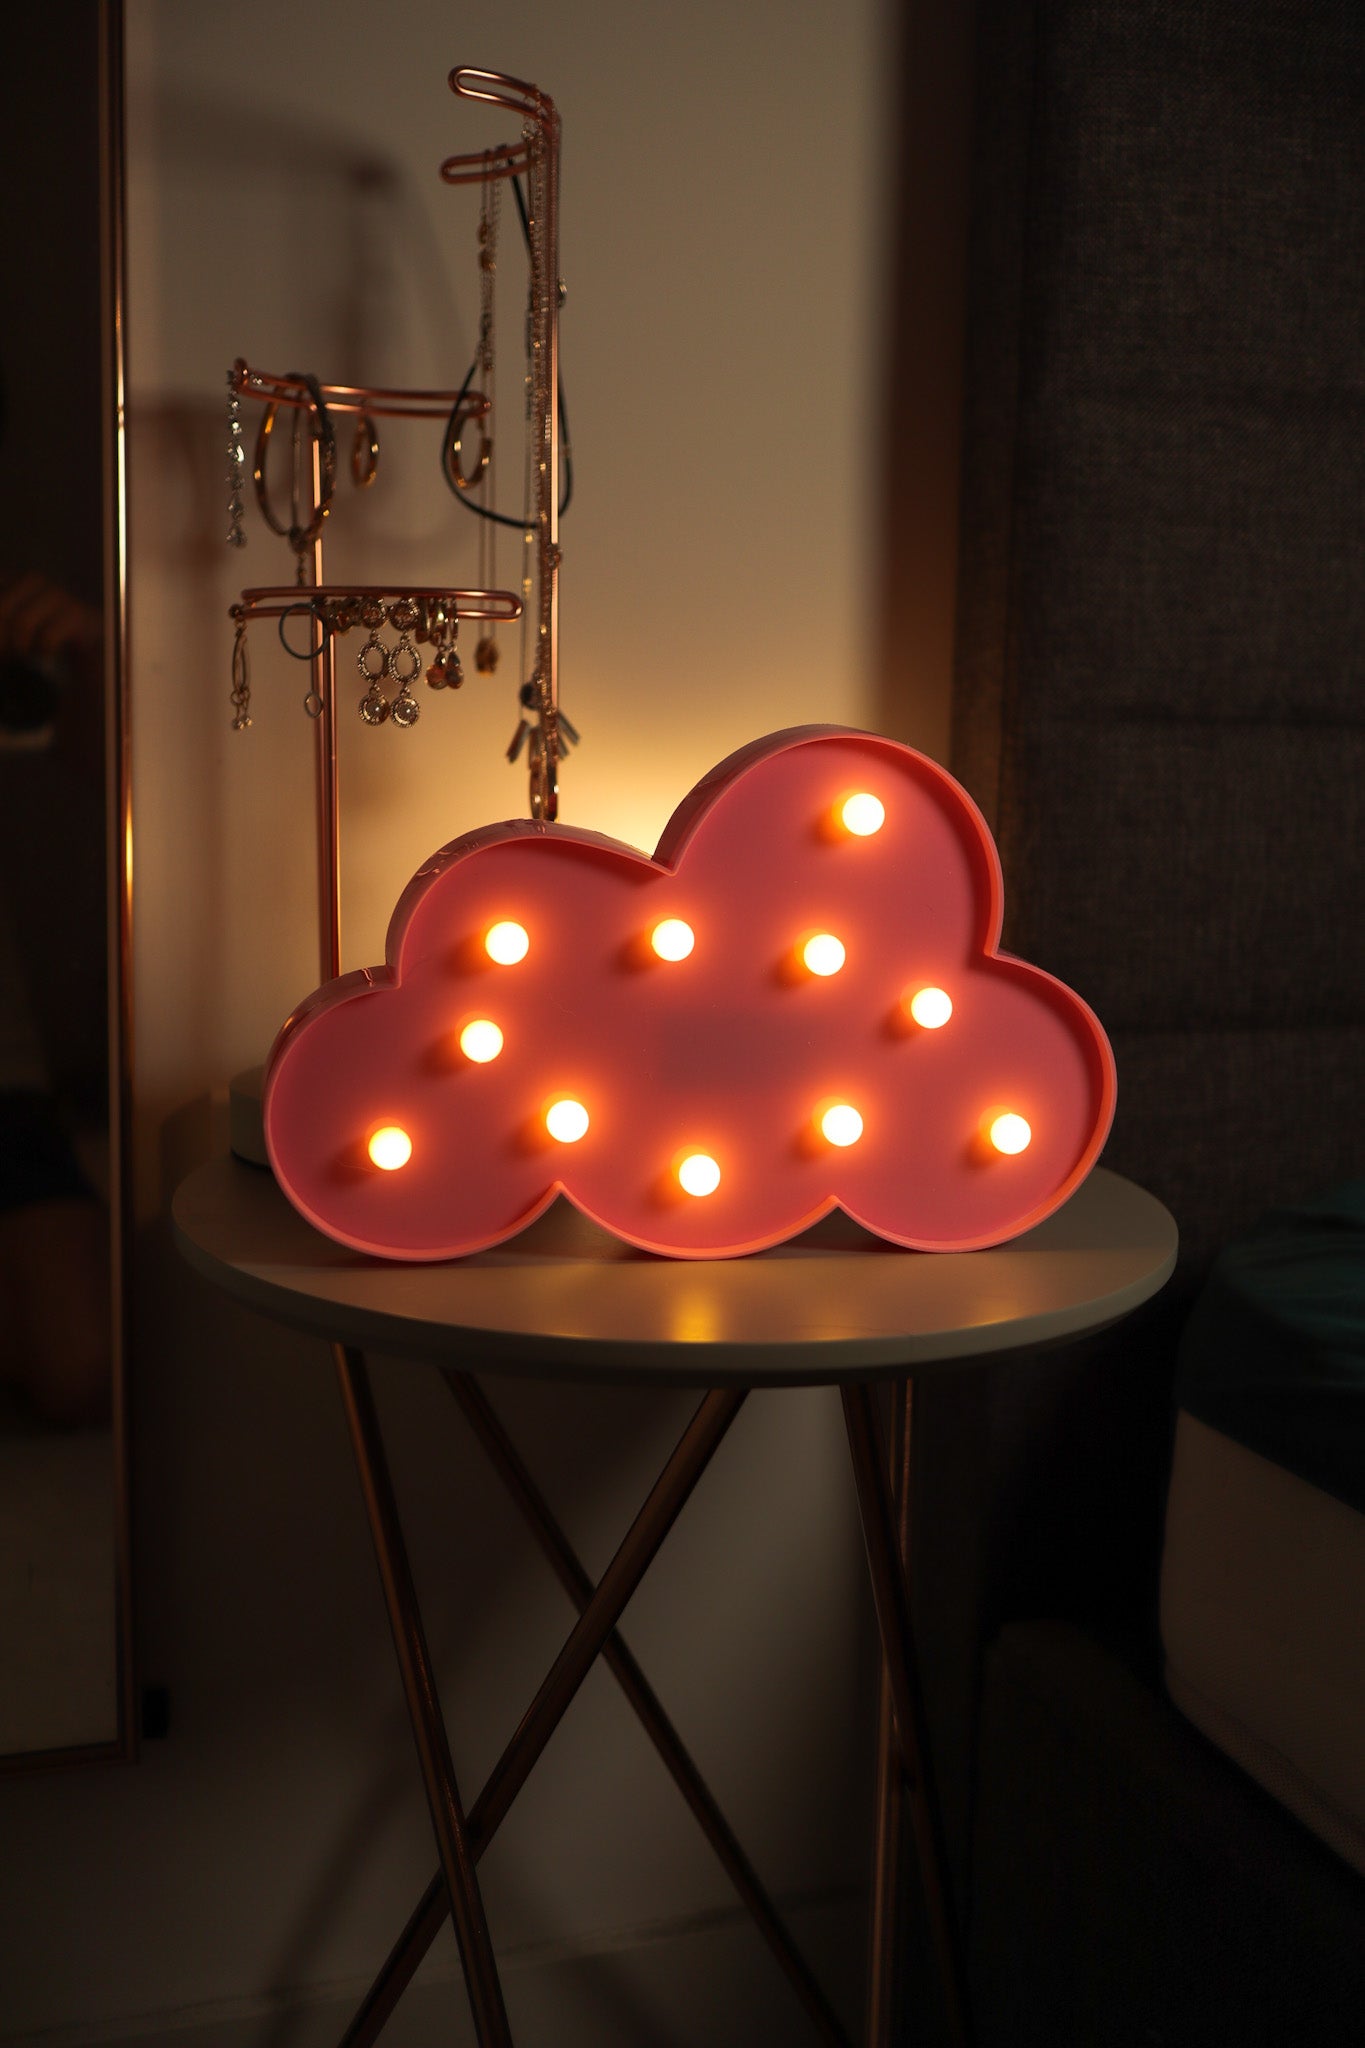 LED Cloud Sign Light, Warm White LED Lamp For Living Room & Bedroom, Table & Wall Christmas Decoration for Kids & Adults - Battery Powered - White